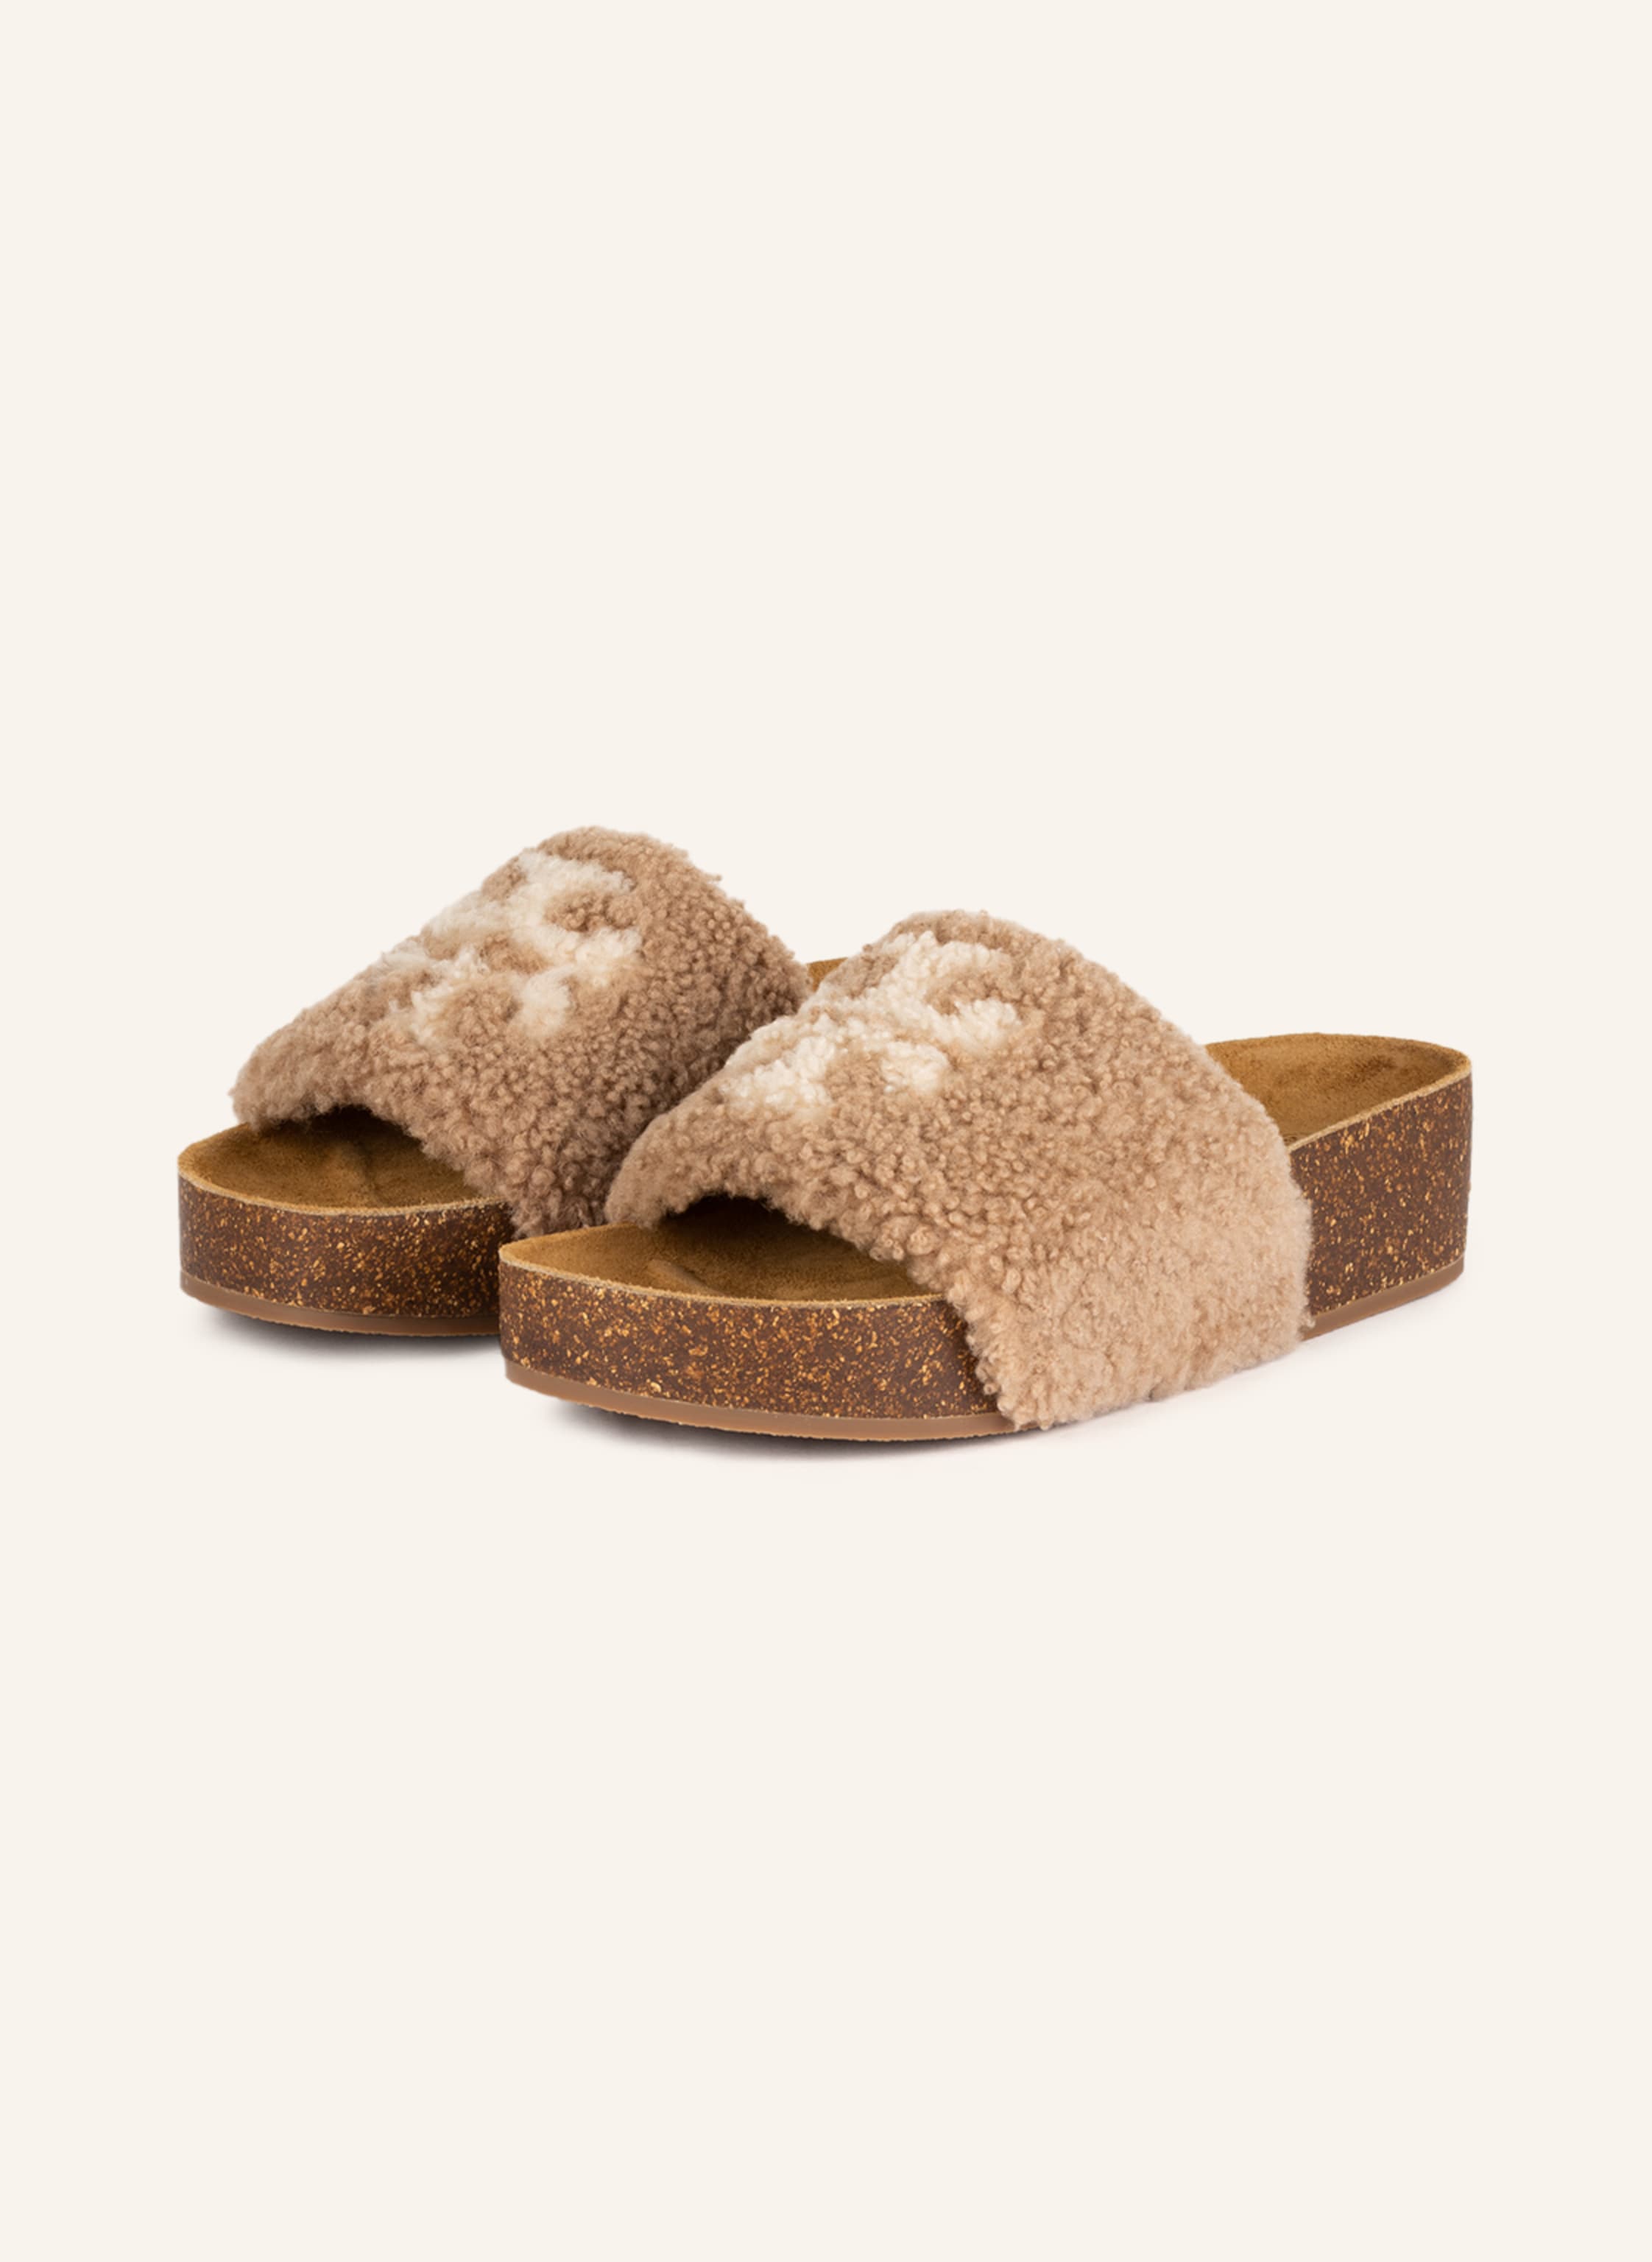 TORY BURCH Slides with faux fur trim in light brown/ white | Breuninger